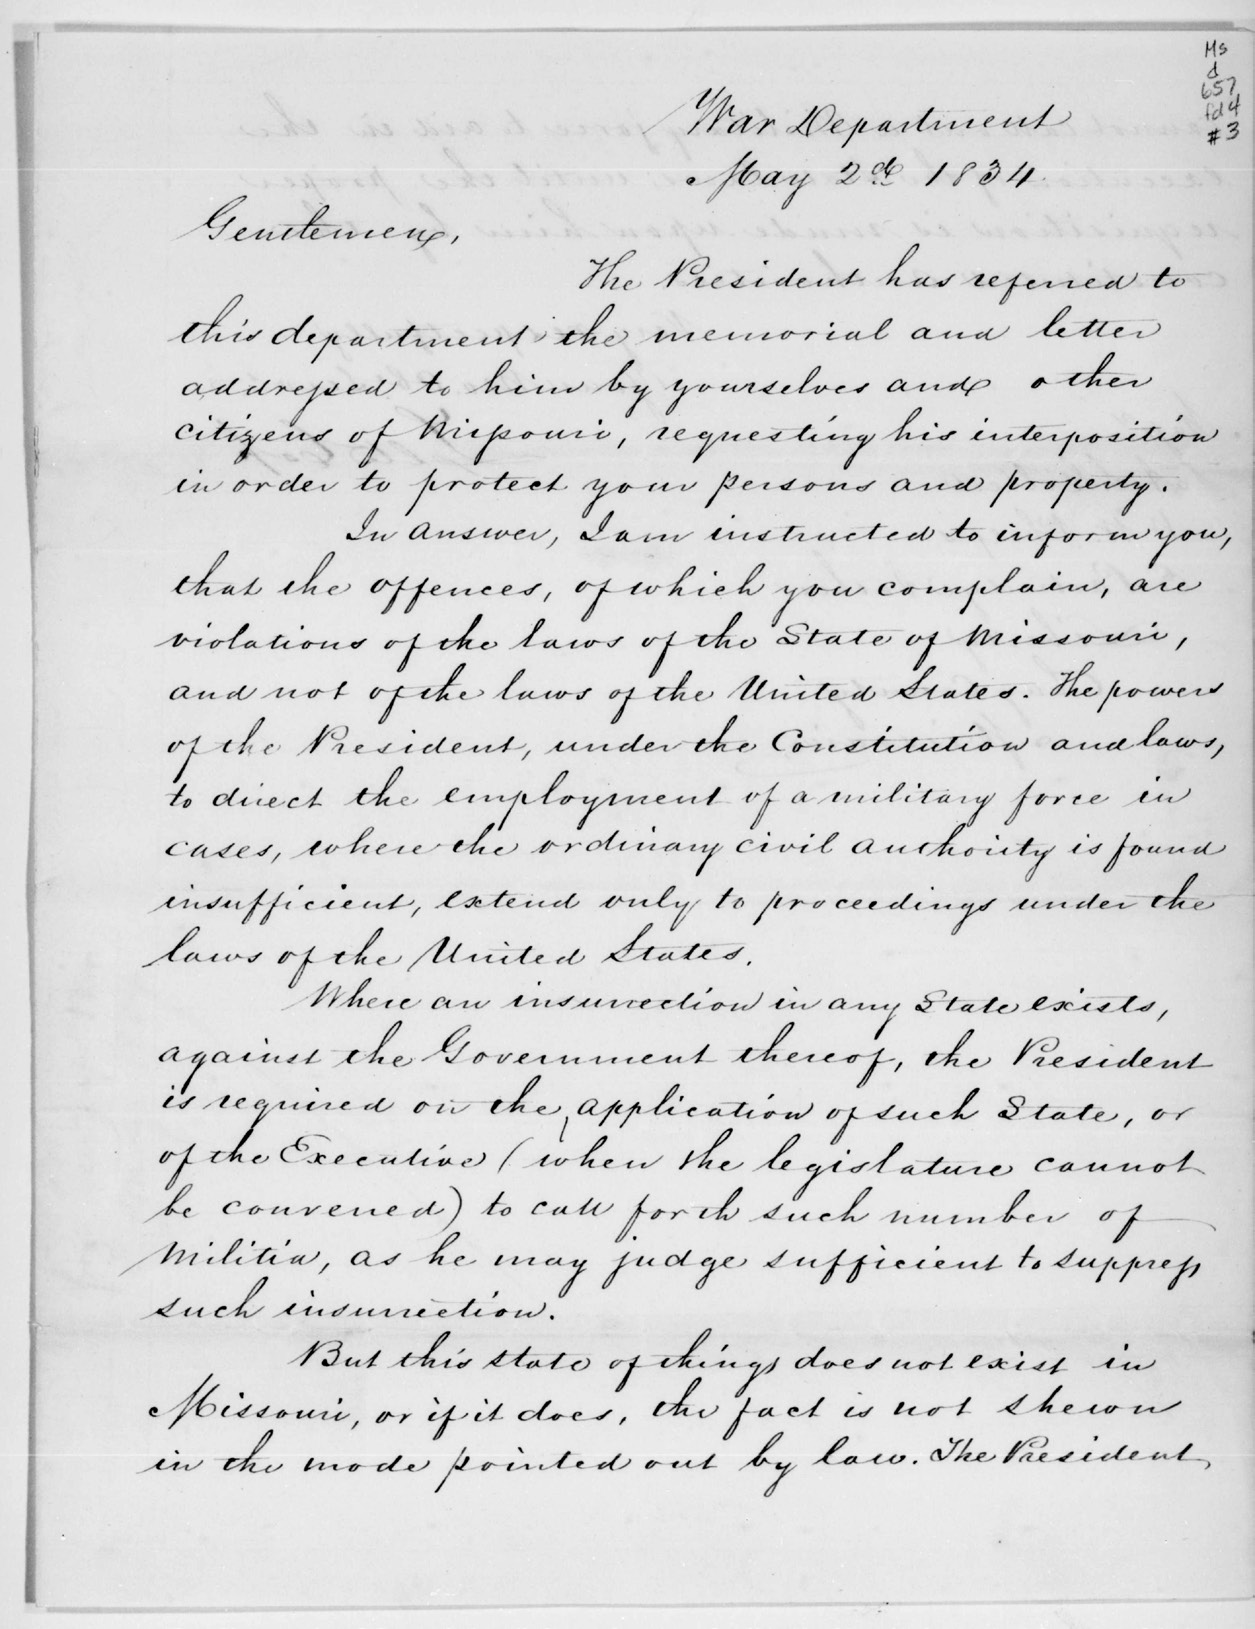 Letter from secretary of war Lewis Cass, 2 May 1834. W. W. Phelps Collection of Missouri Documents, 1833–1837, Church History Library.